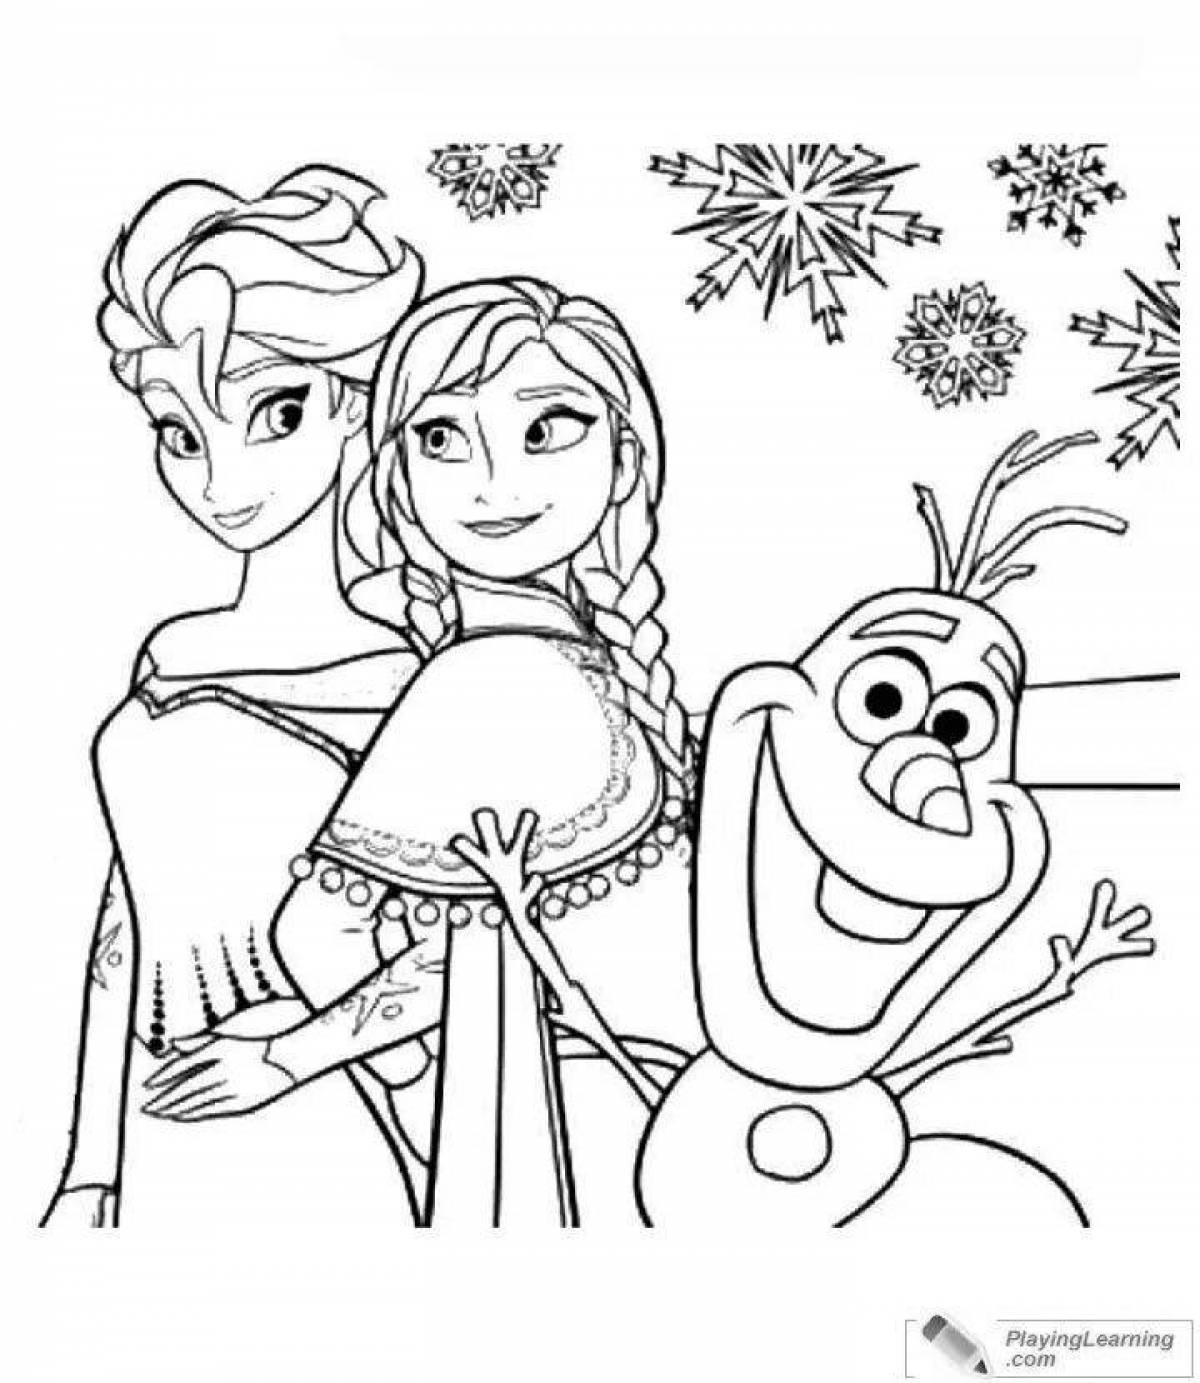 Fabulous Elsa coloring book for kids 3-4 years old